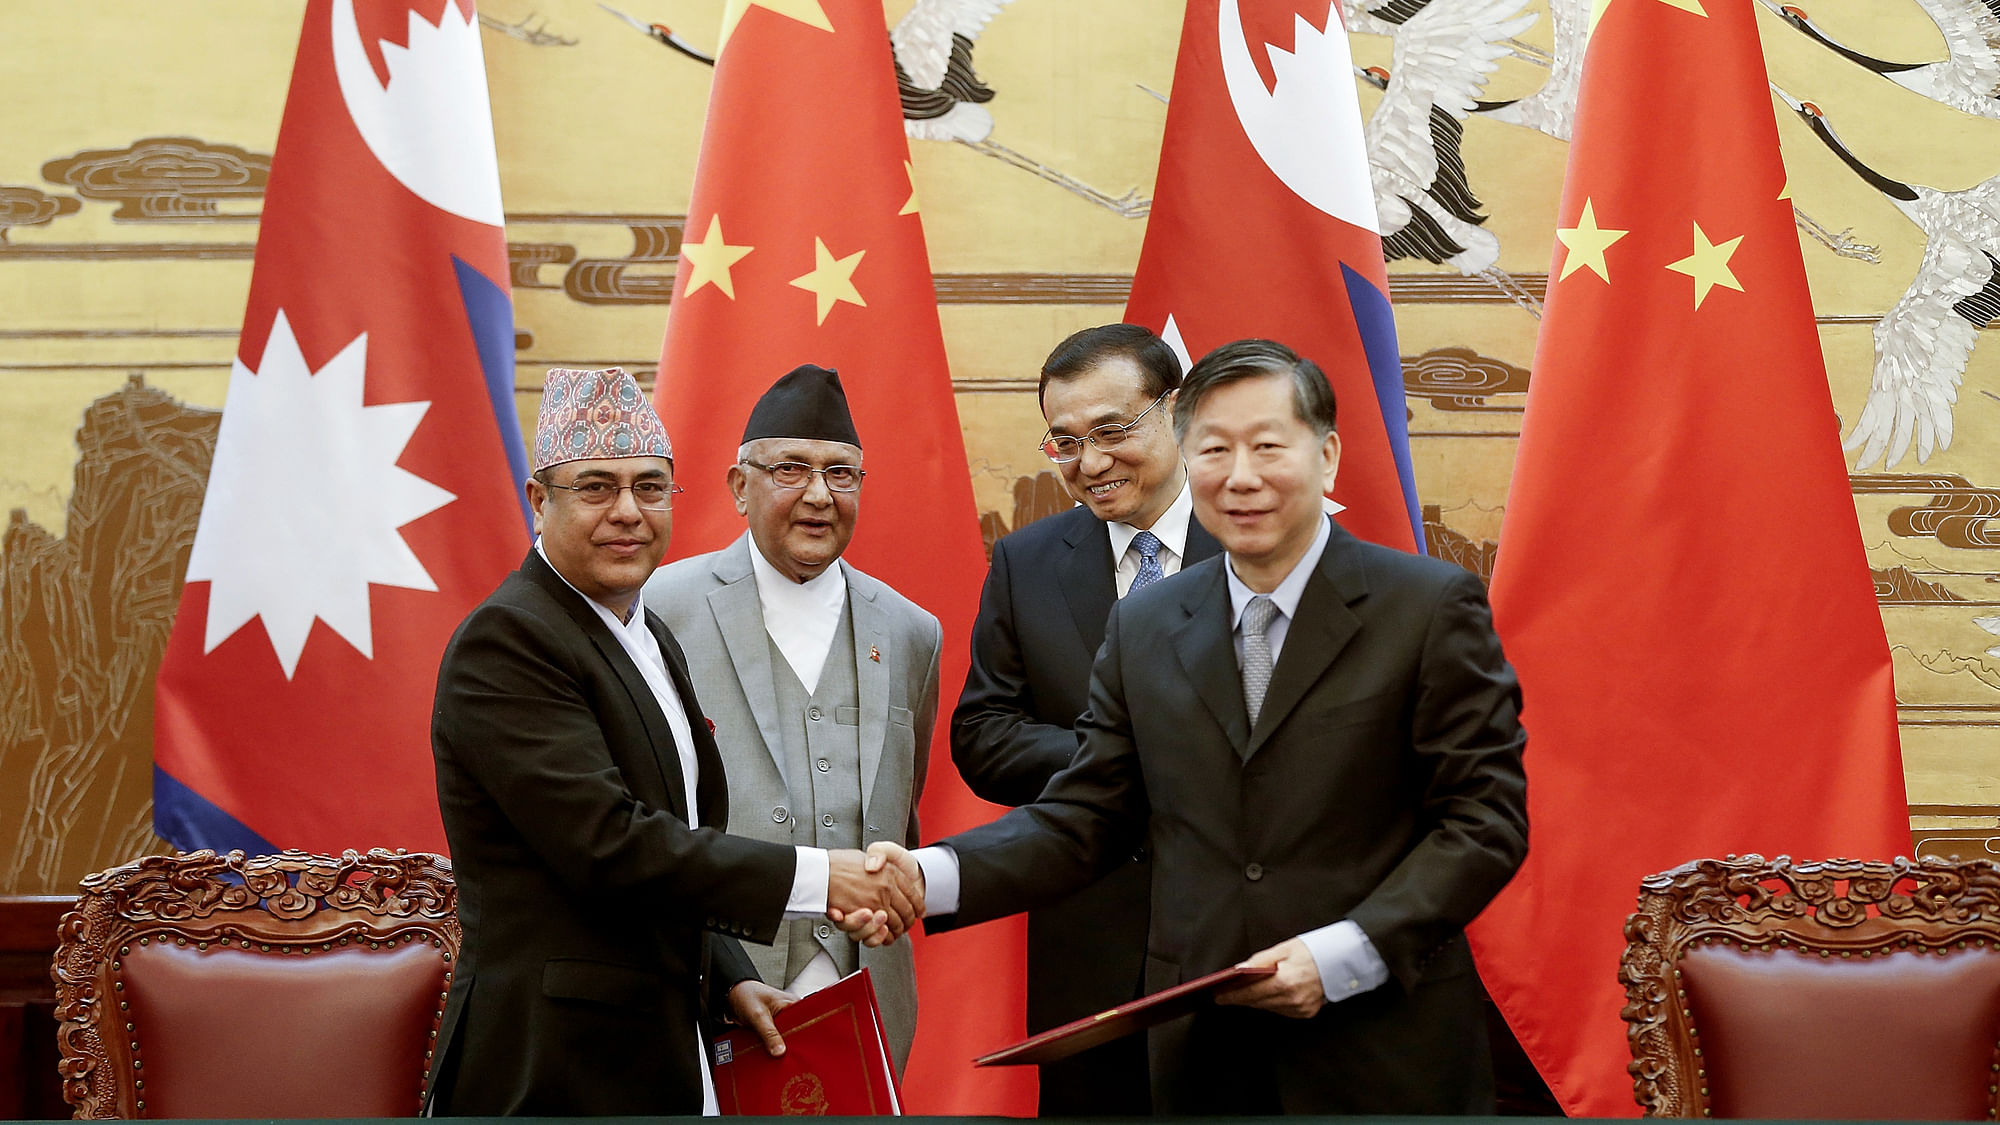 Chinese Premier Li Keqiang, rear right, with Nepal’s Prime Minister Khadga Prasad Oli, rear left, attend a signing ceremony at the Great Hall of the People Monday, 21 March 2016 in Beijing, China.&nbsp;